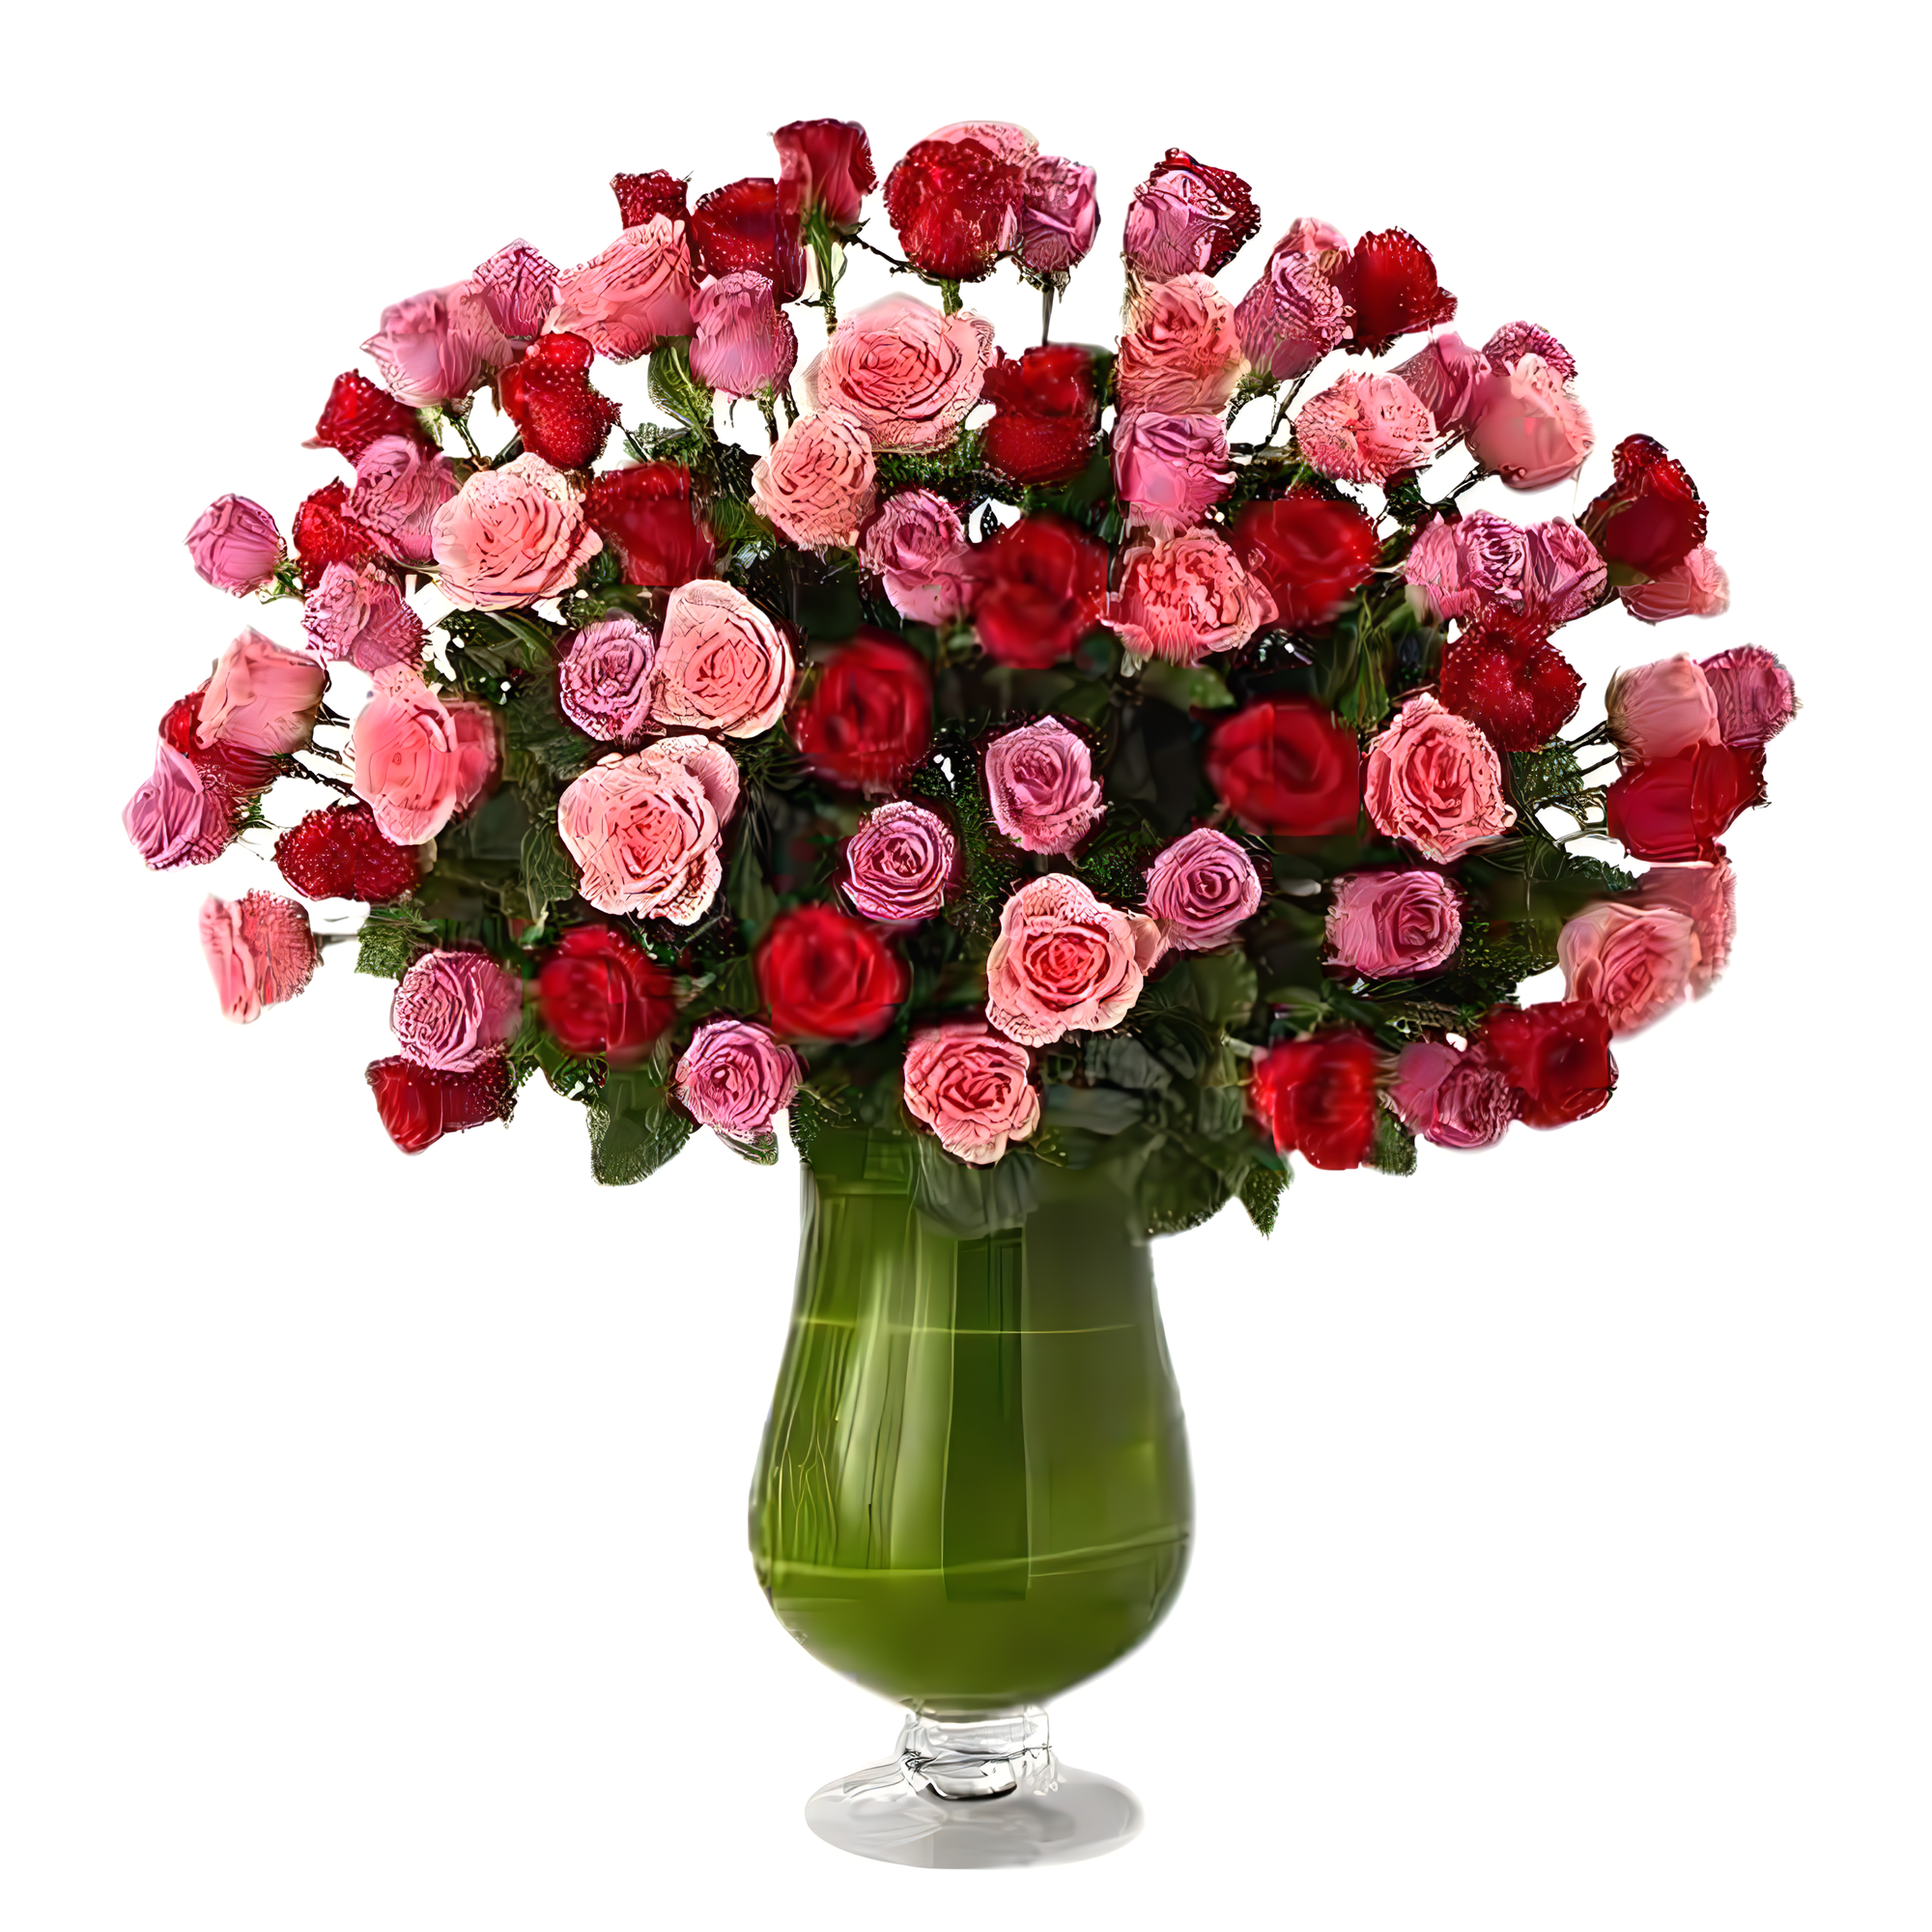 Manhattan Flower Delivery - Luxury Rose Bouquet - 24 Premium Red, Pink & Lavender Long-Stem Roses - Products > Luxury Collection